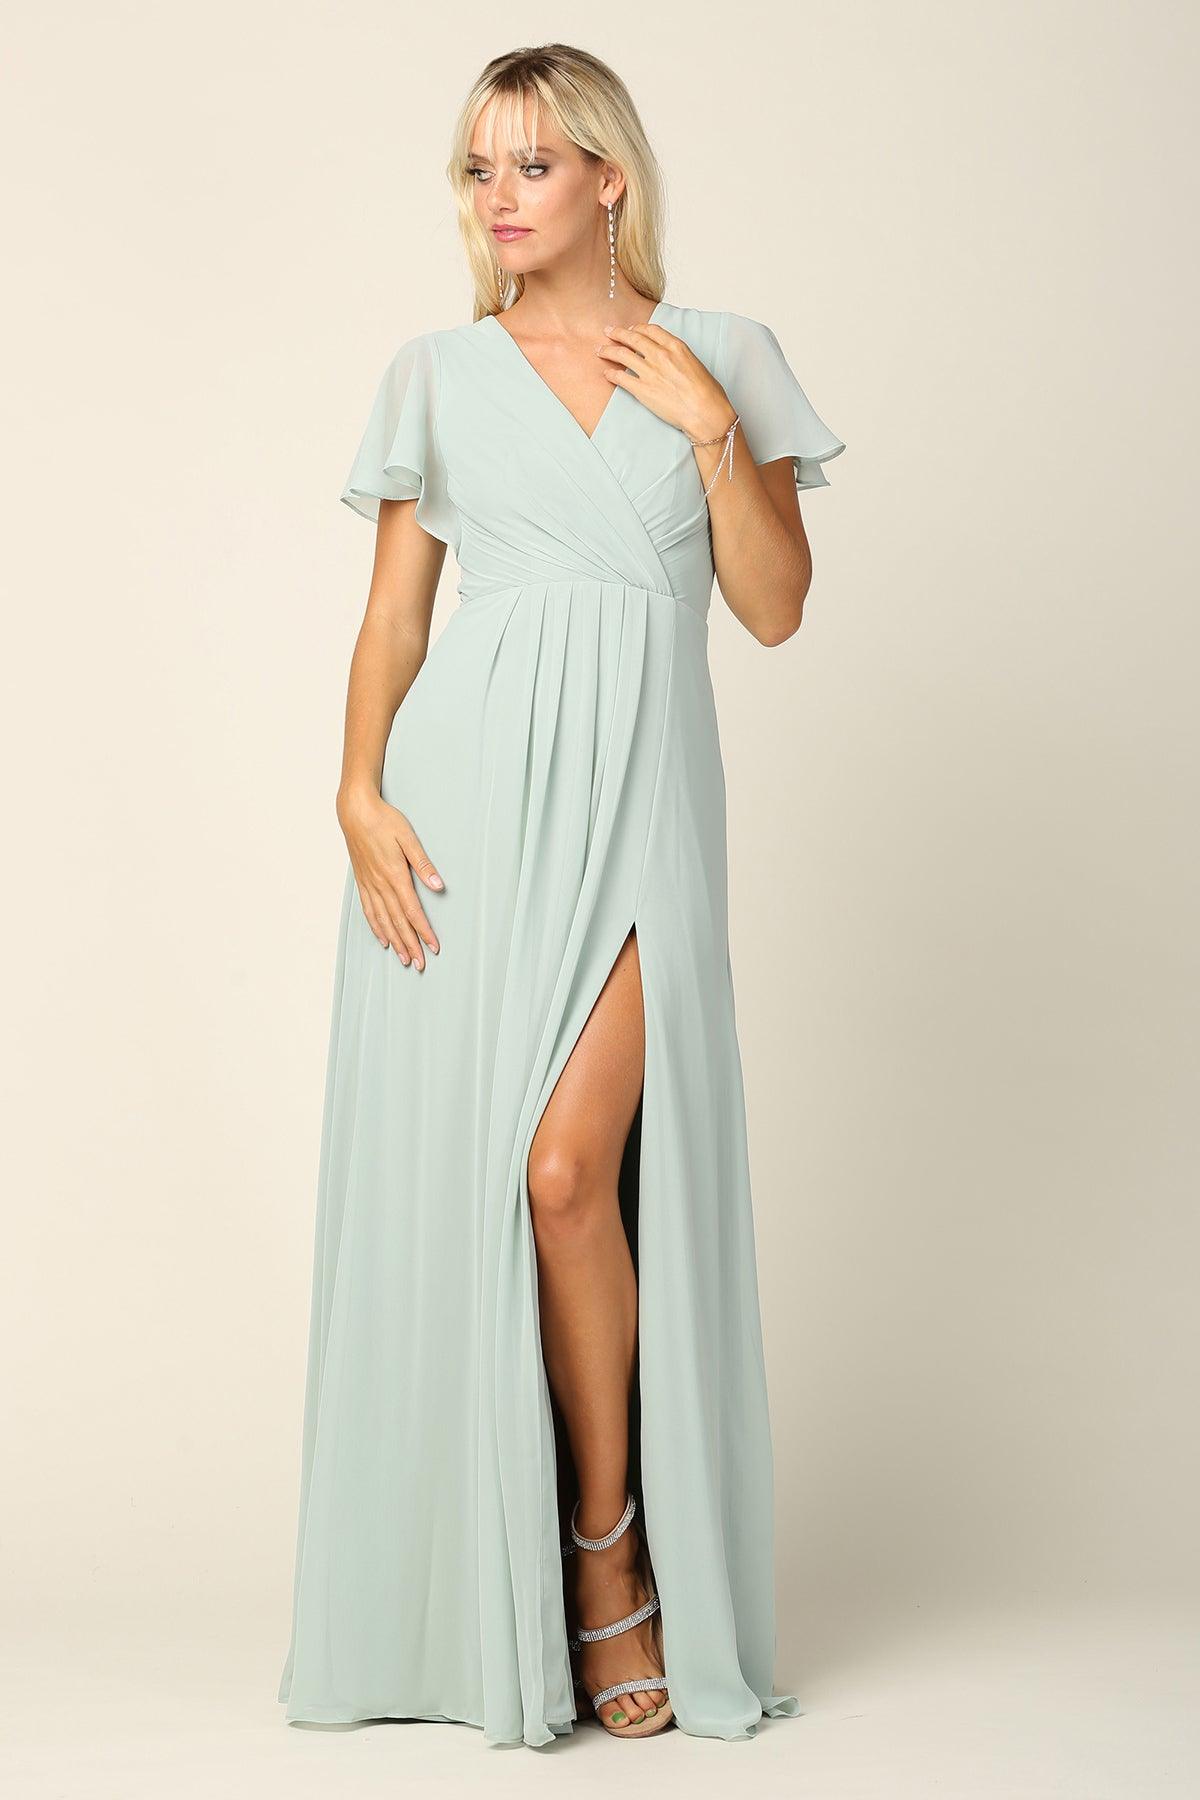 Long Short Sleeve Mother of the Bride Chiffon Dress - The Dress Outlet